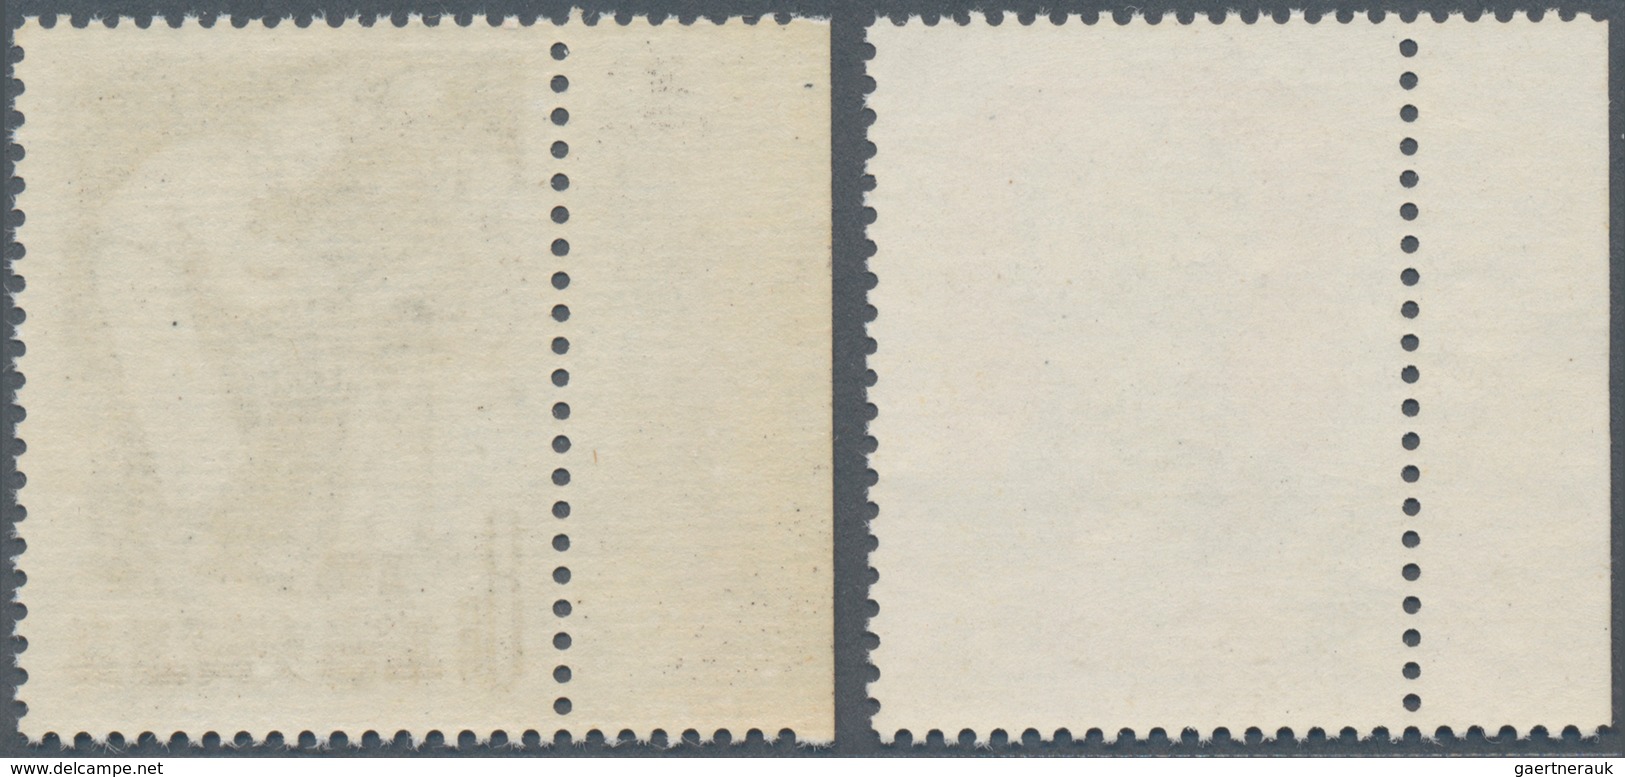 China - Volksrepublik: 1959/1963, Six Issues: Harvest Block Of Four (C60) Unused No Gum As Issued, C - Lettres & Documents